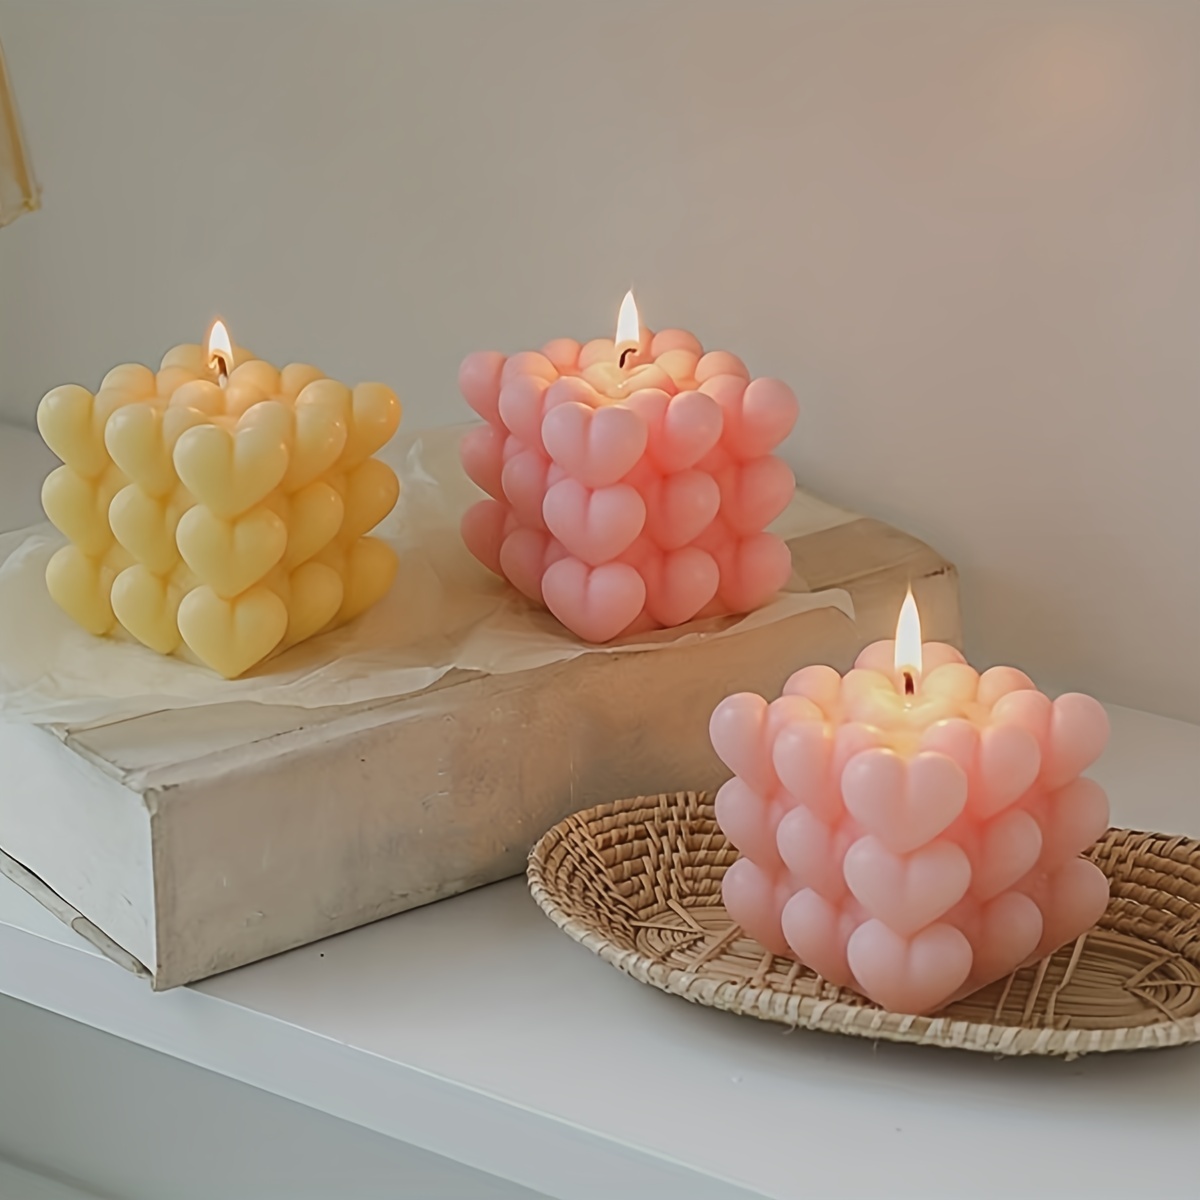 1pc Bubble Candle Molds - Silicone Mold For Candles Making, DIY 3D Moulds  For Soy Wax, Beeswax, Scented Candle, Valentine's Day Gifts (Heart Bubble)